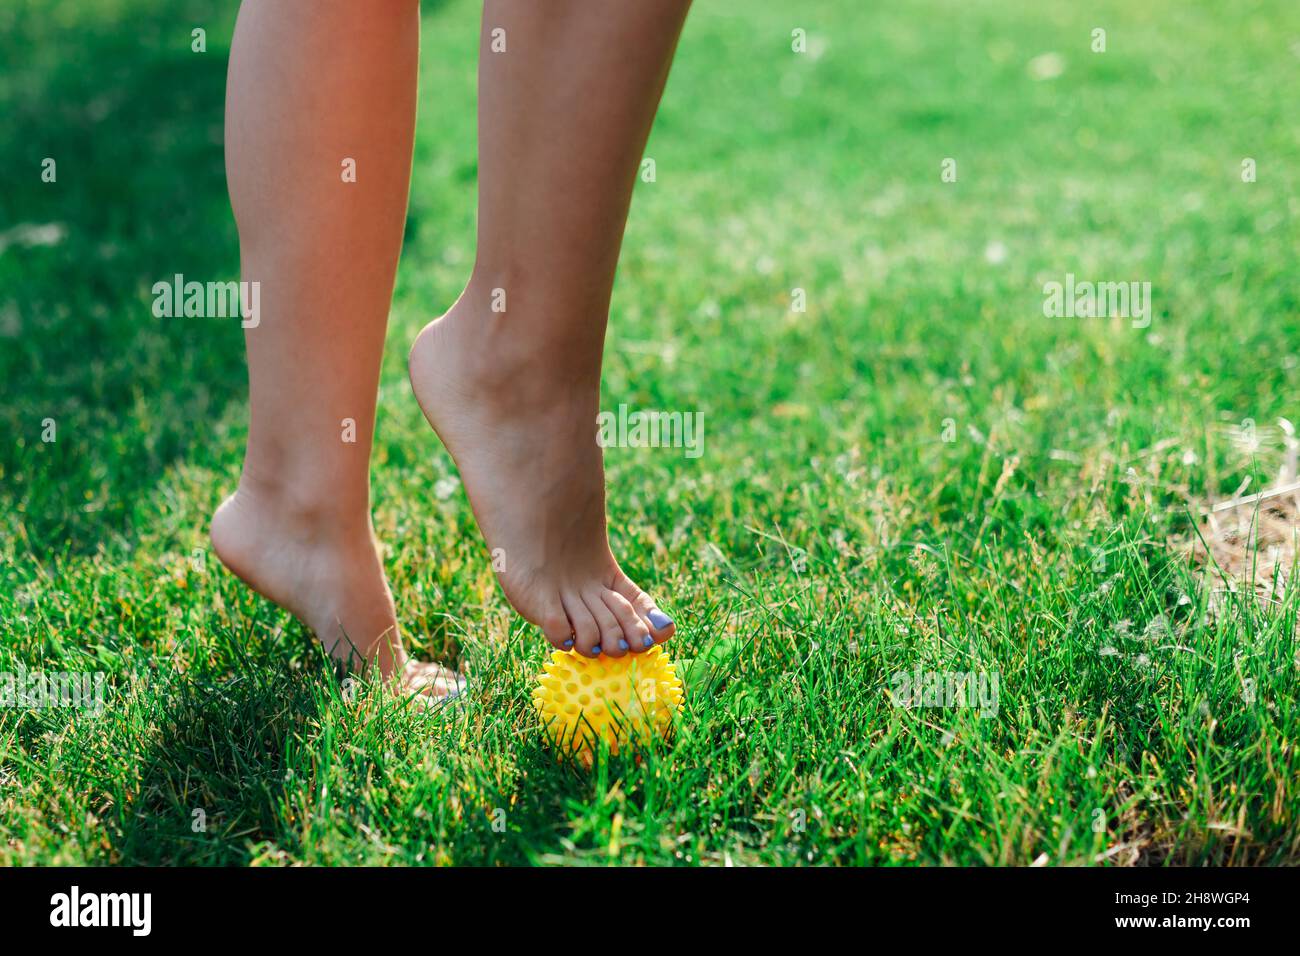 spiky massage rubber for myofascial release and improvement of lymphatic system, woman feet on green grass in forest Stock Photo